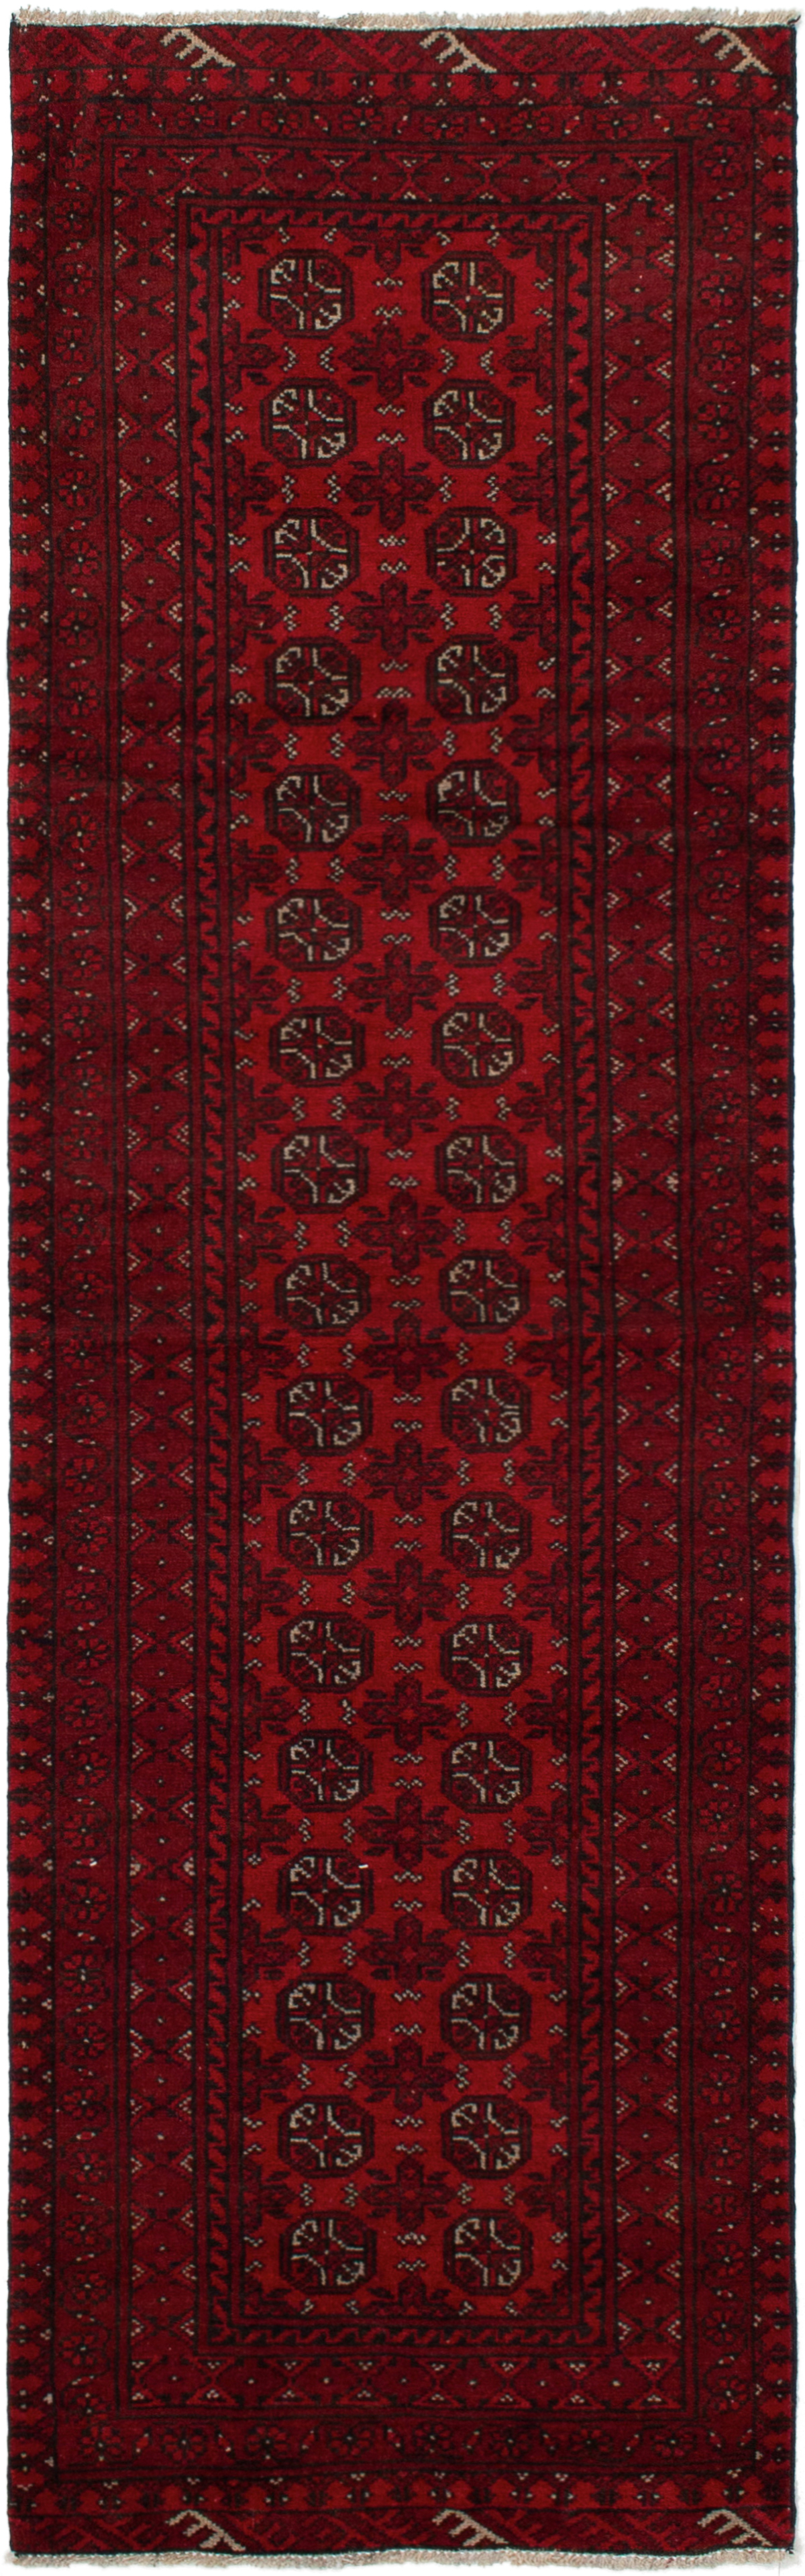 Hand-knotted Finest Khal Mohammadi Red Wool Rug 2'5" x 8'11" Size: 2'5" x 8'11"  